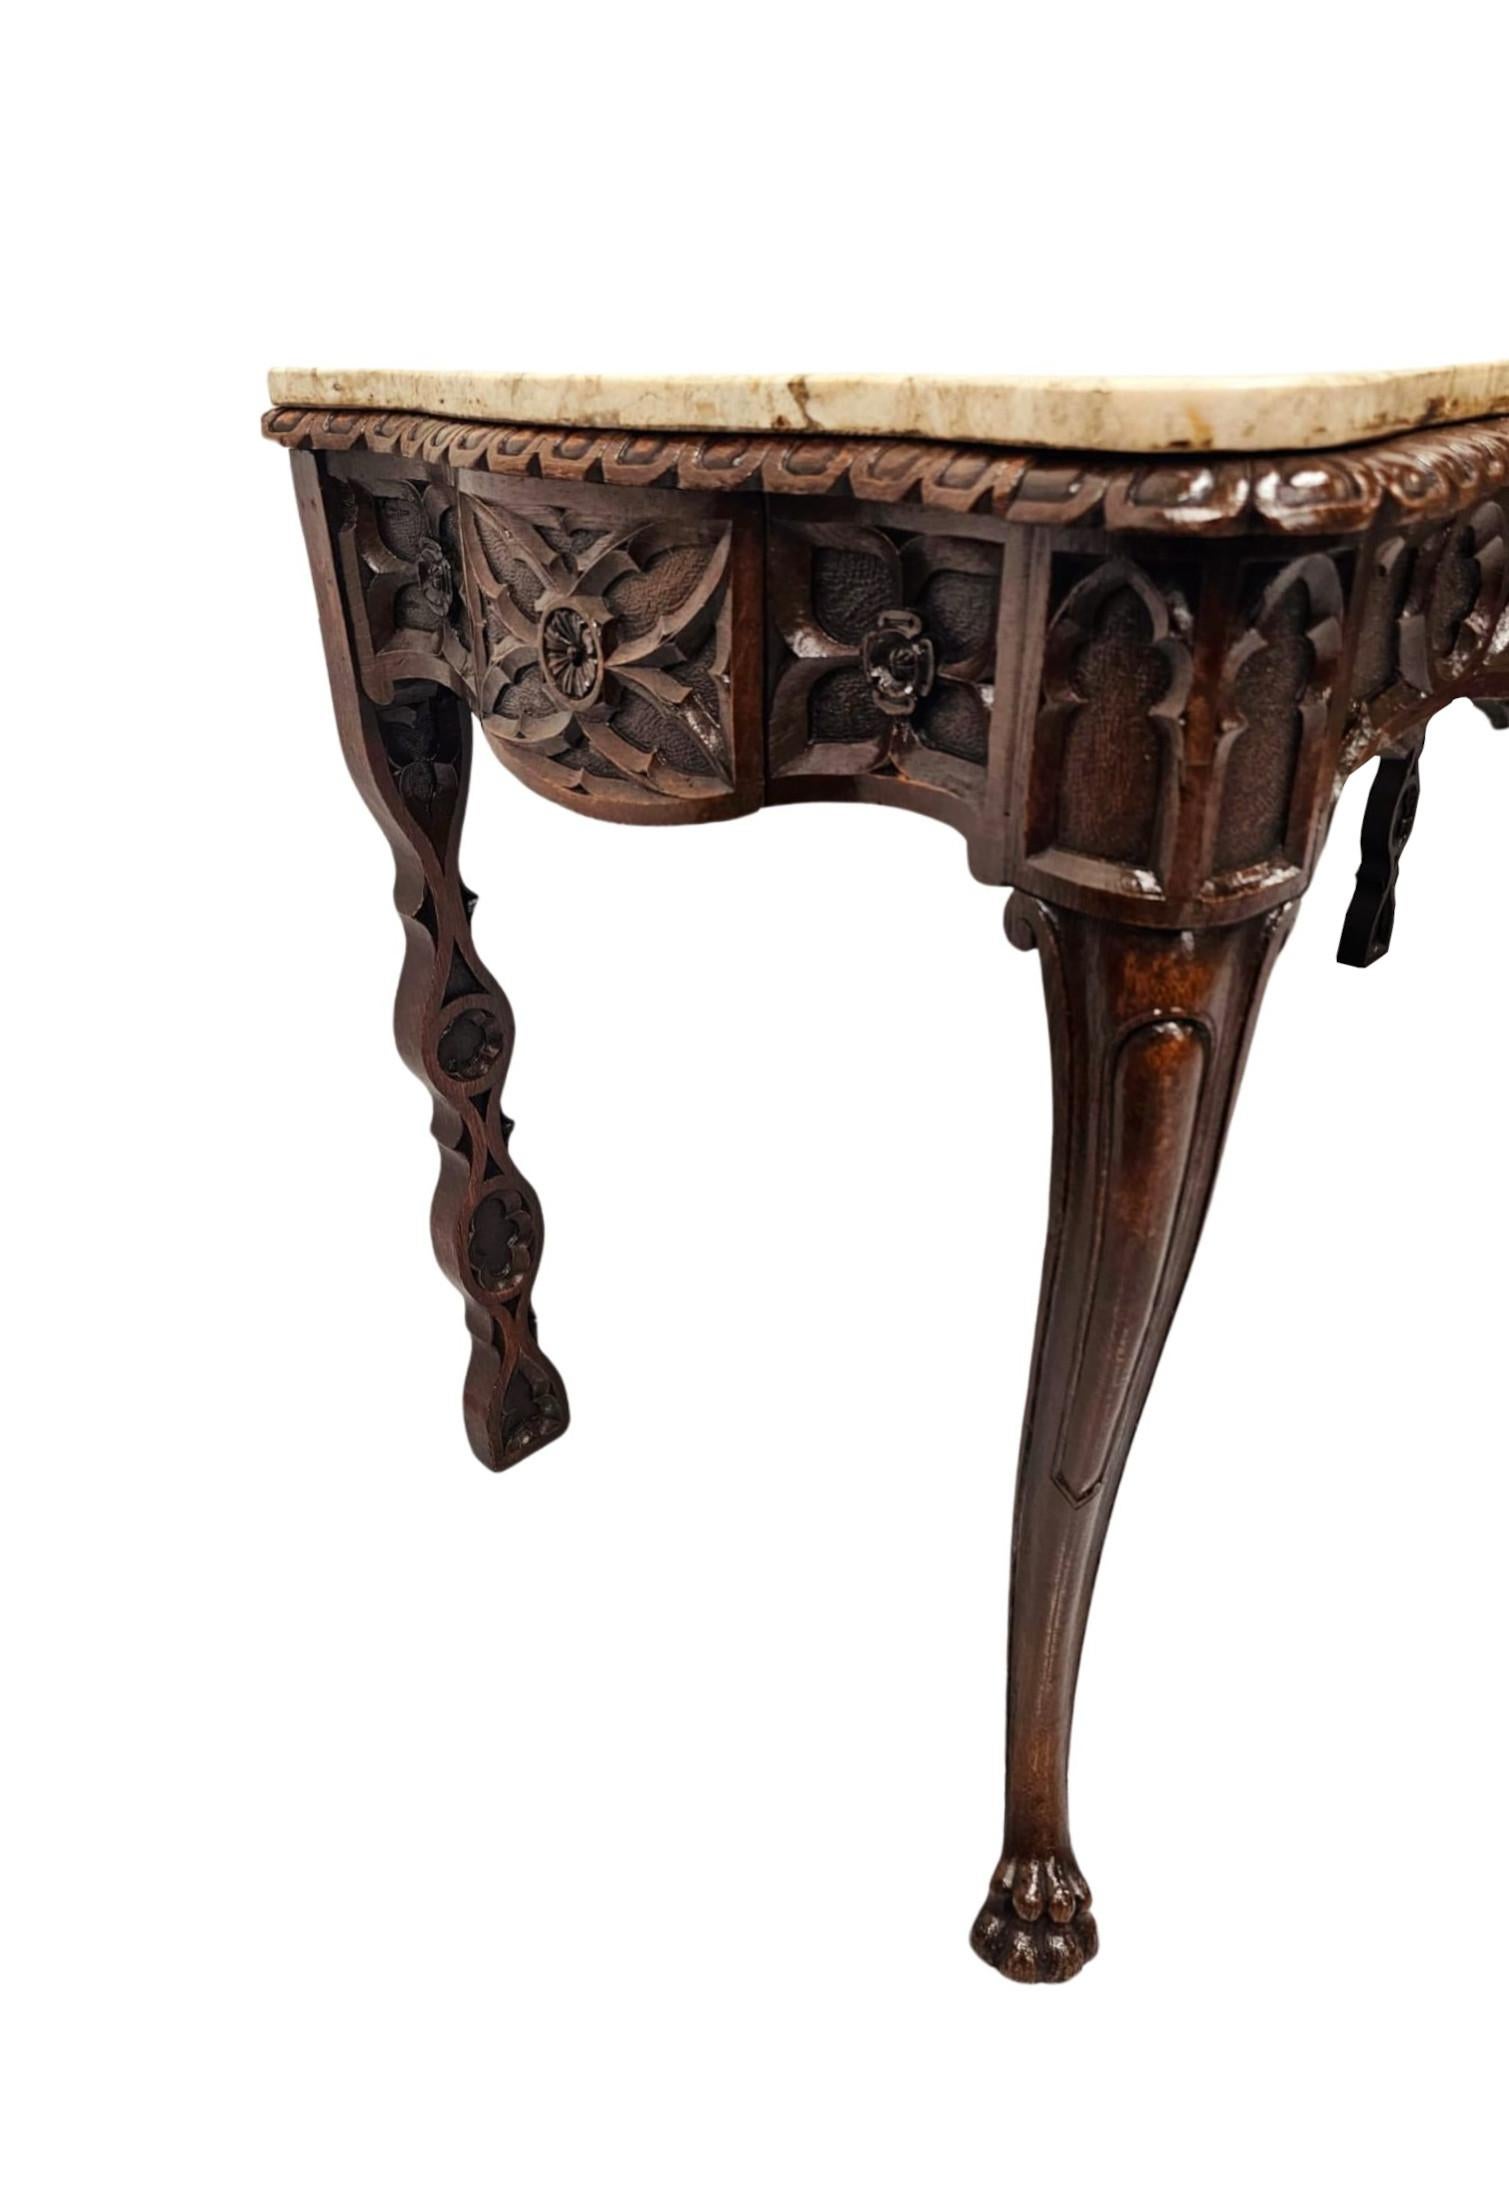  A Very Rare and Fine 19th Century Irish Gothic Hall or Console Table  For Sale 5